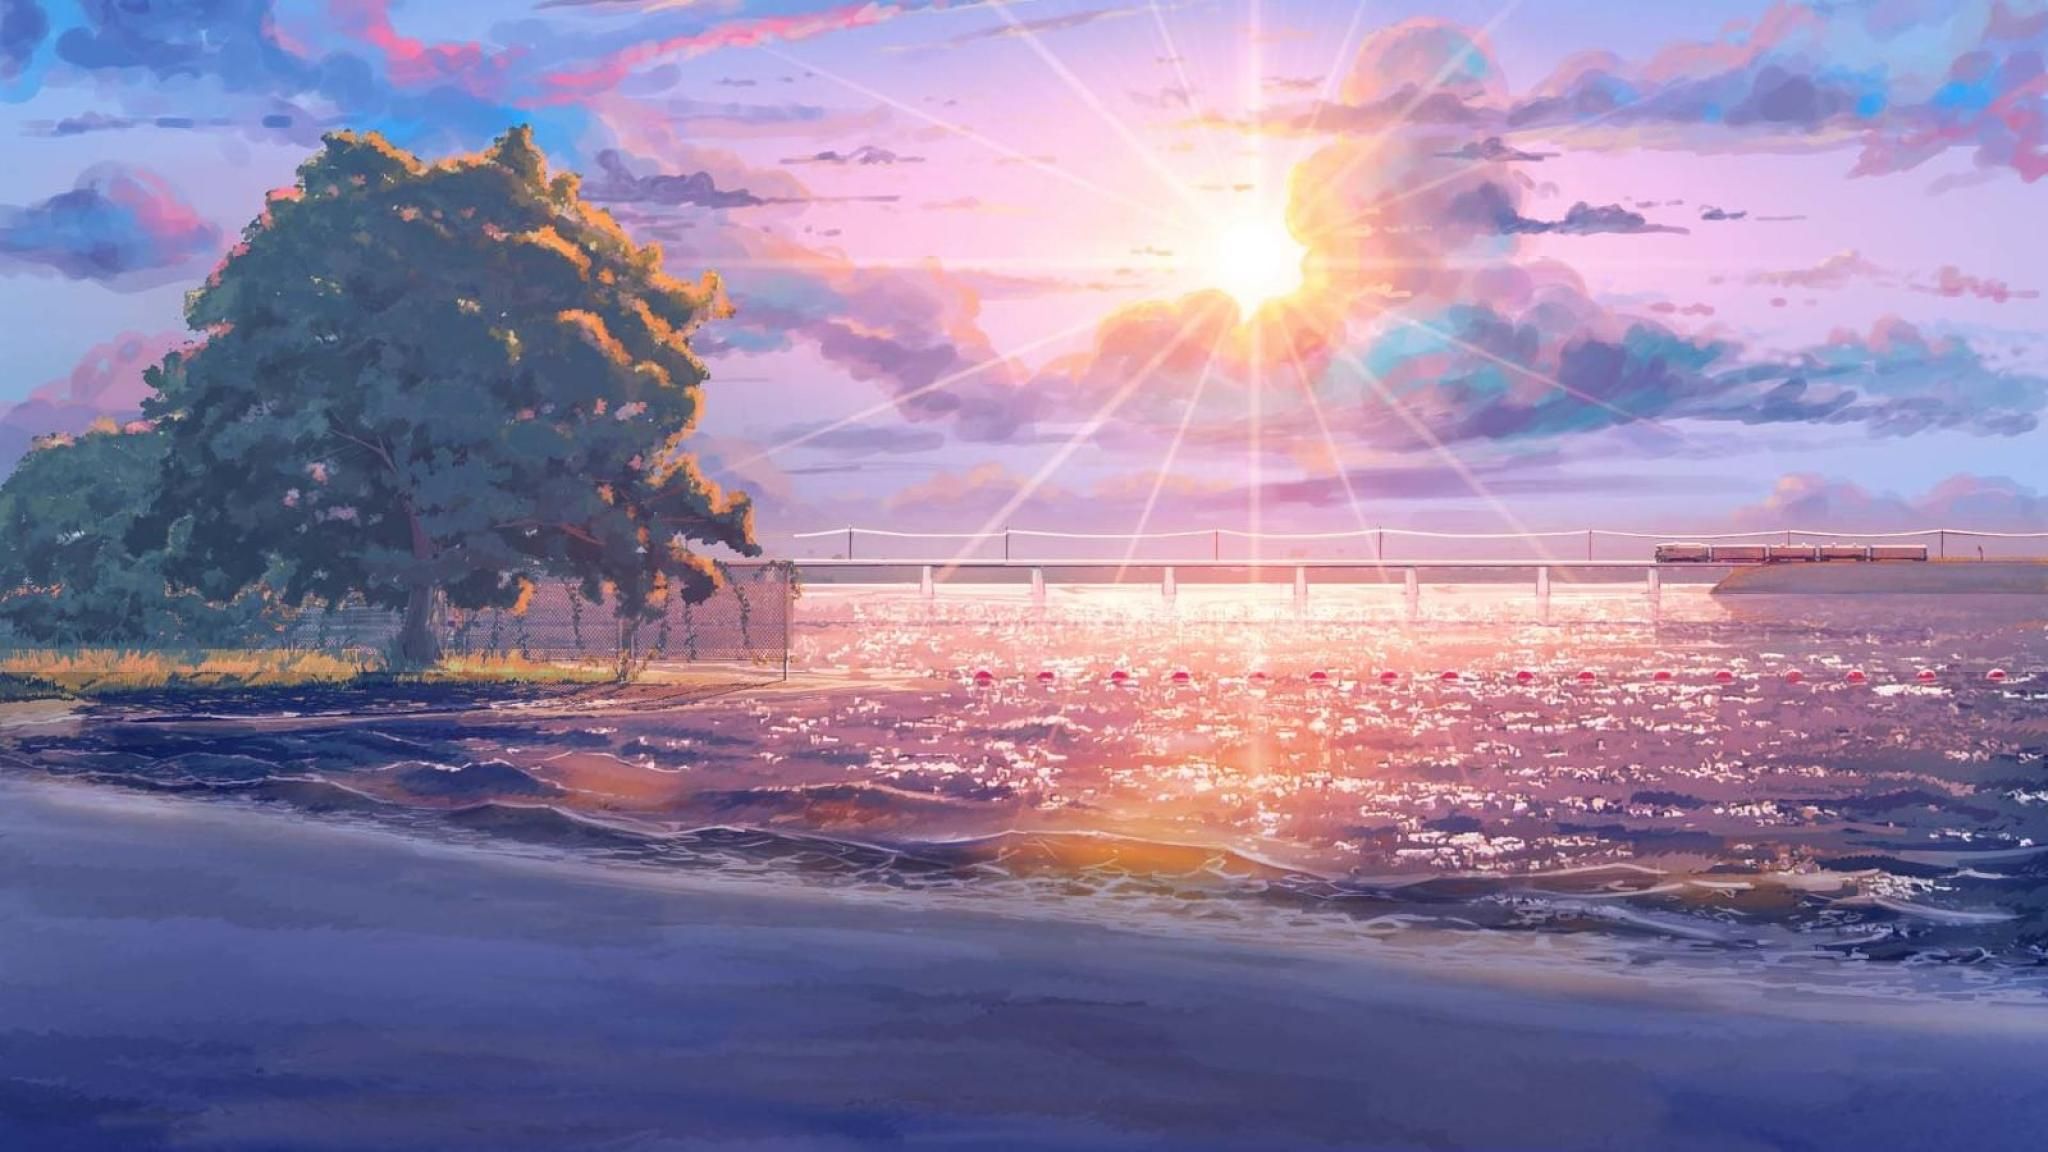 Free Download Best Environmental Art Anime Images In 2019 Music